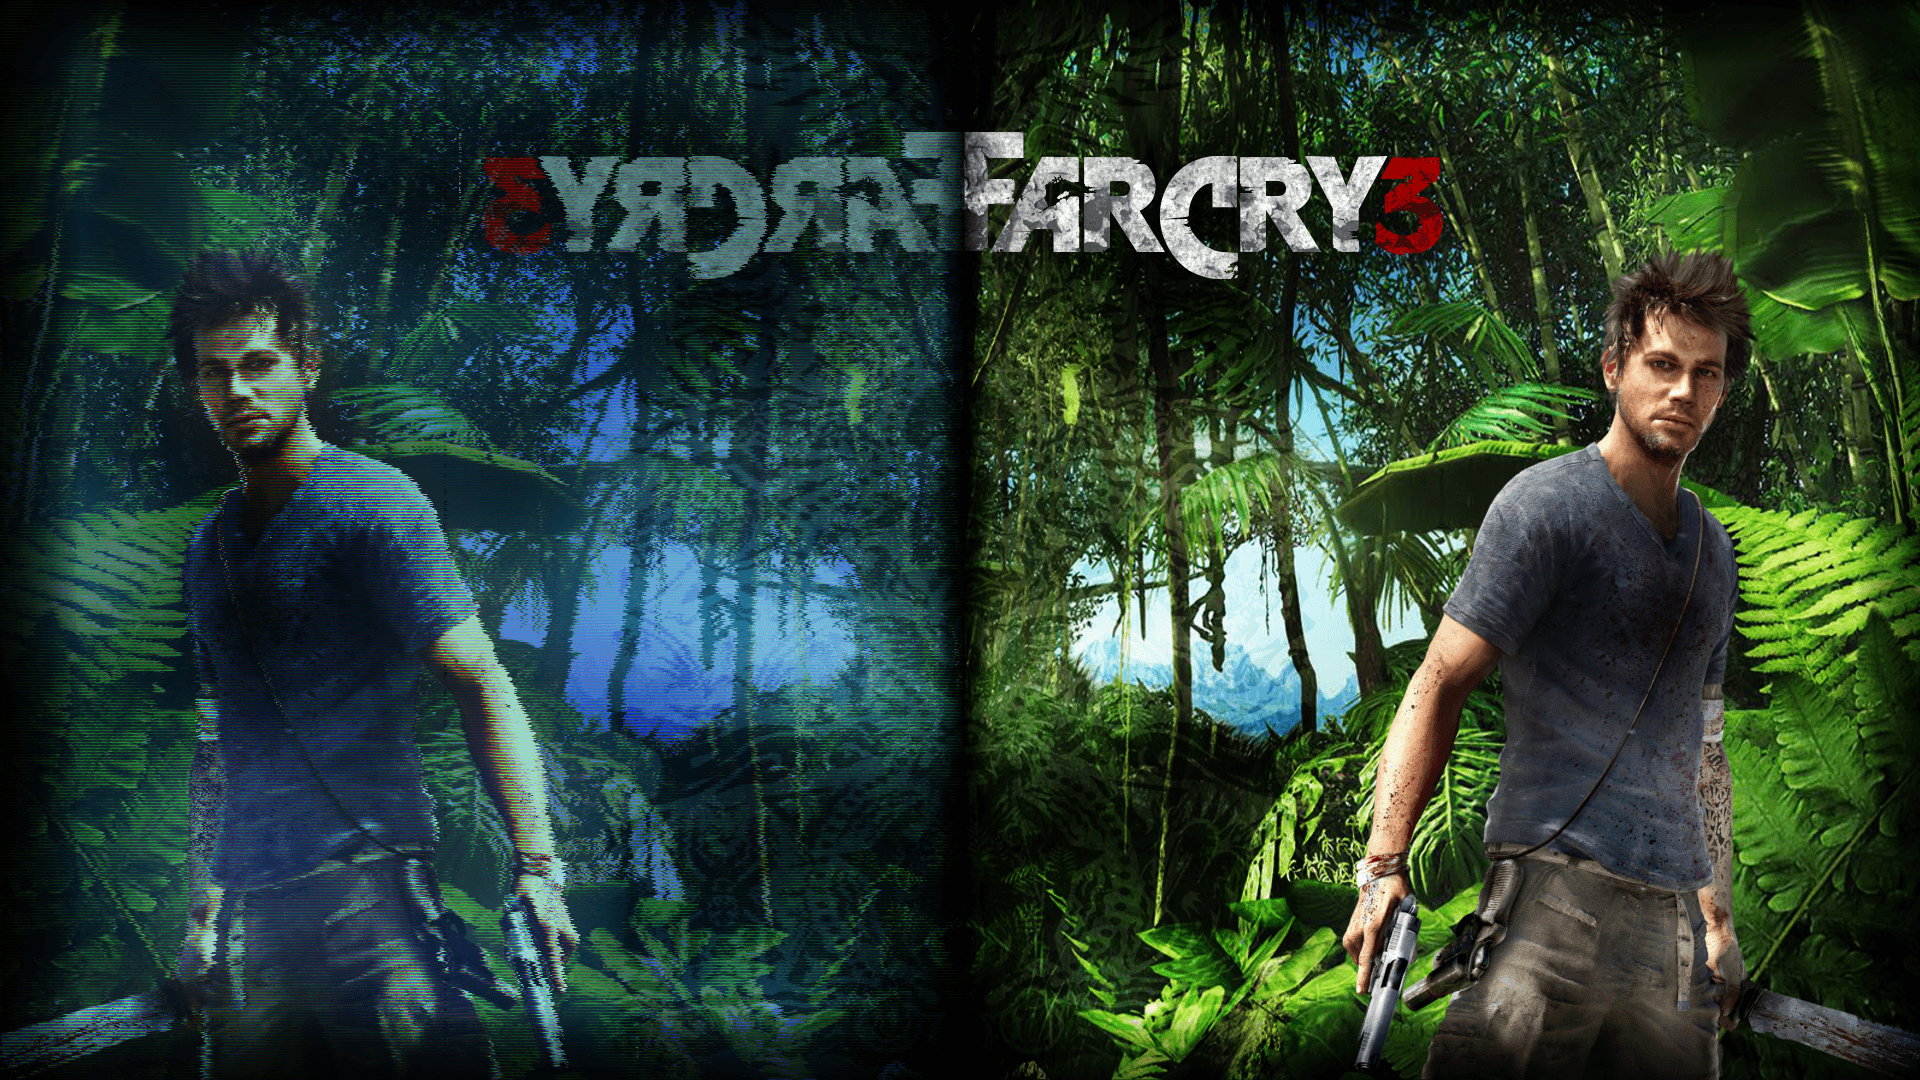 Far Cry 3 Game HD 1080p Wallpaper Download. Art That I Love